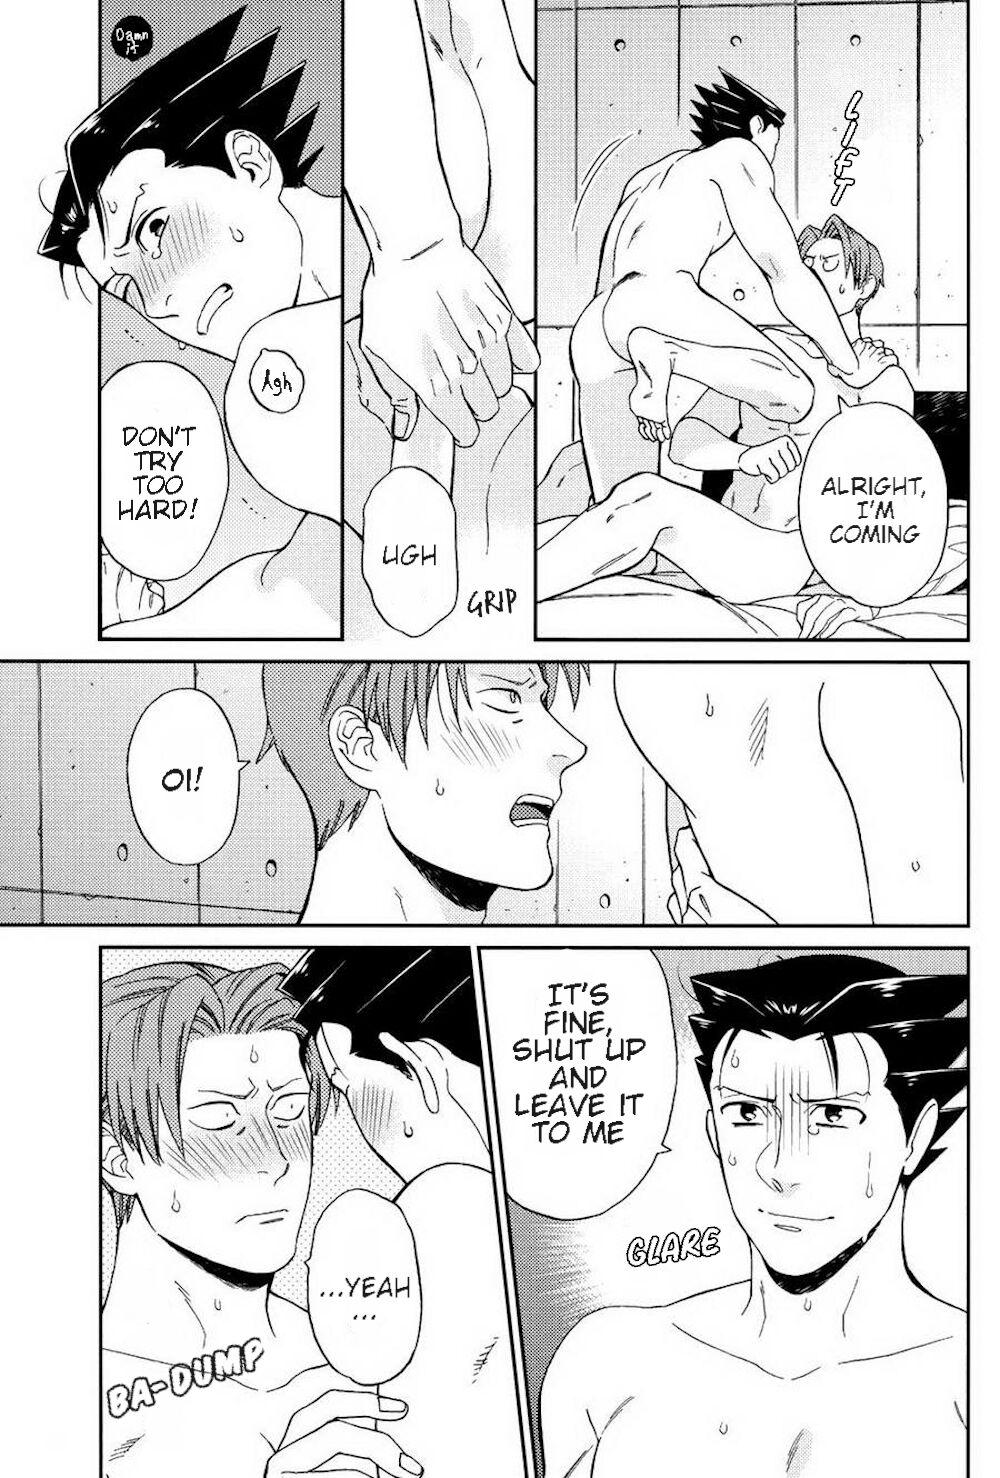 Gay Largedick Kid who can do it if he tries, kid who can't - Ace attorney | gyakuten saiban Pussyeating - Page 10